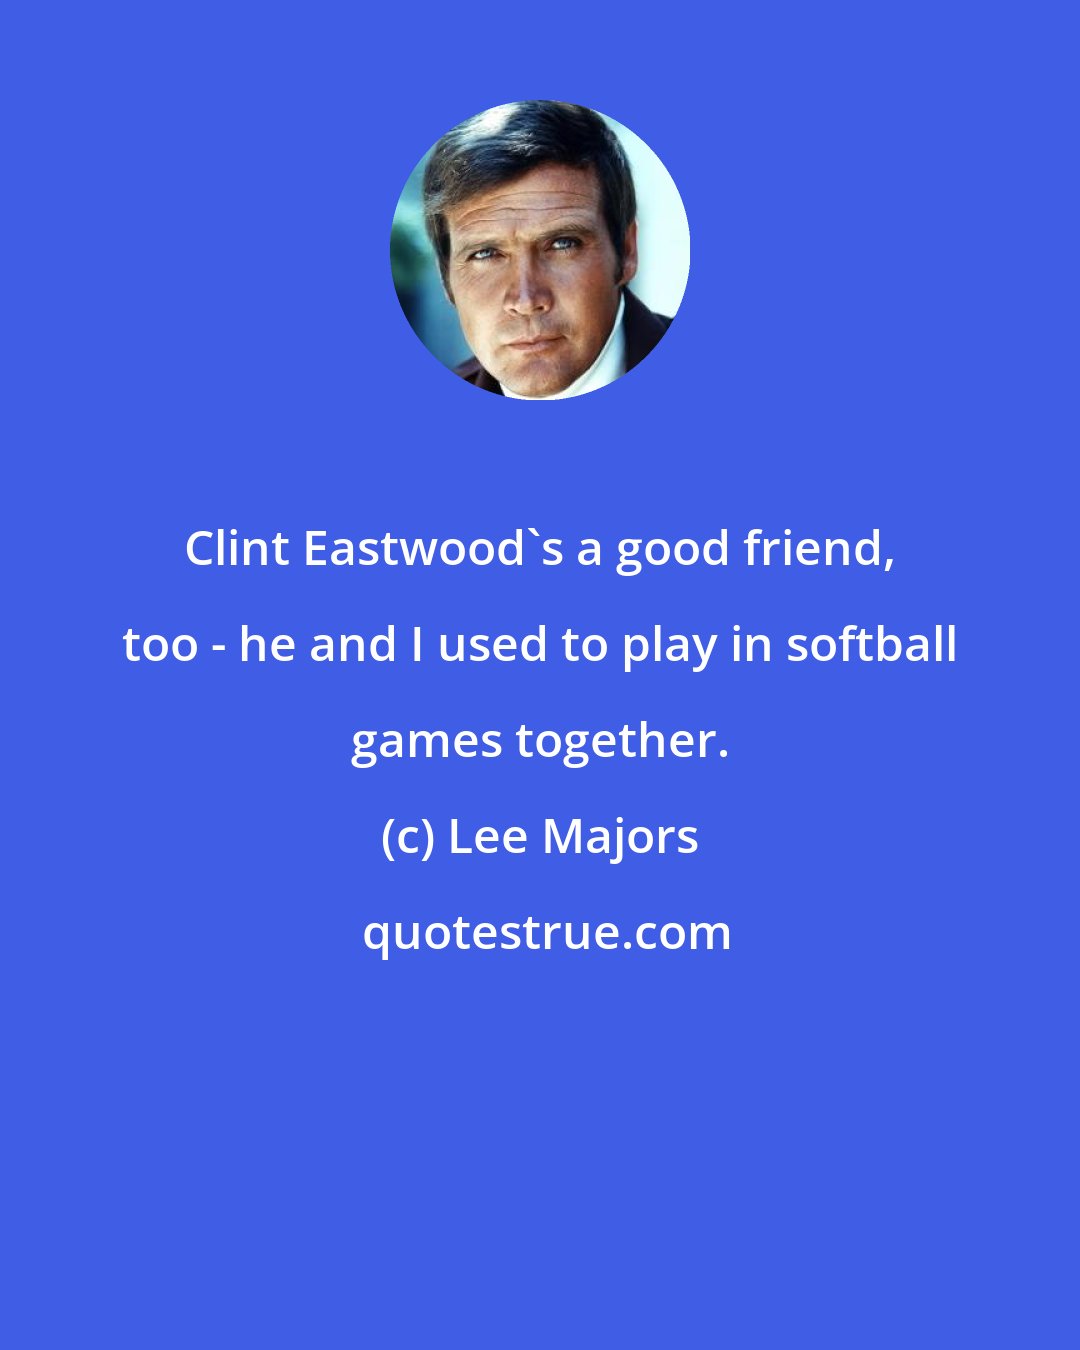 Lee Majors: Clint Eastwood's a good friend, too - he and I used to play in softball games together.